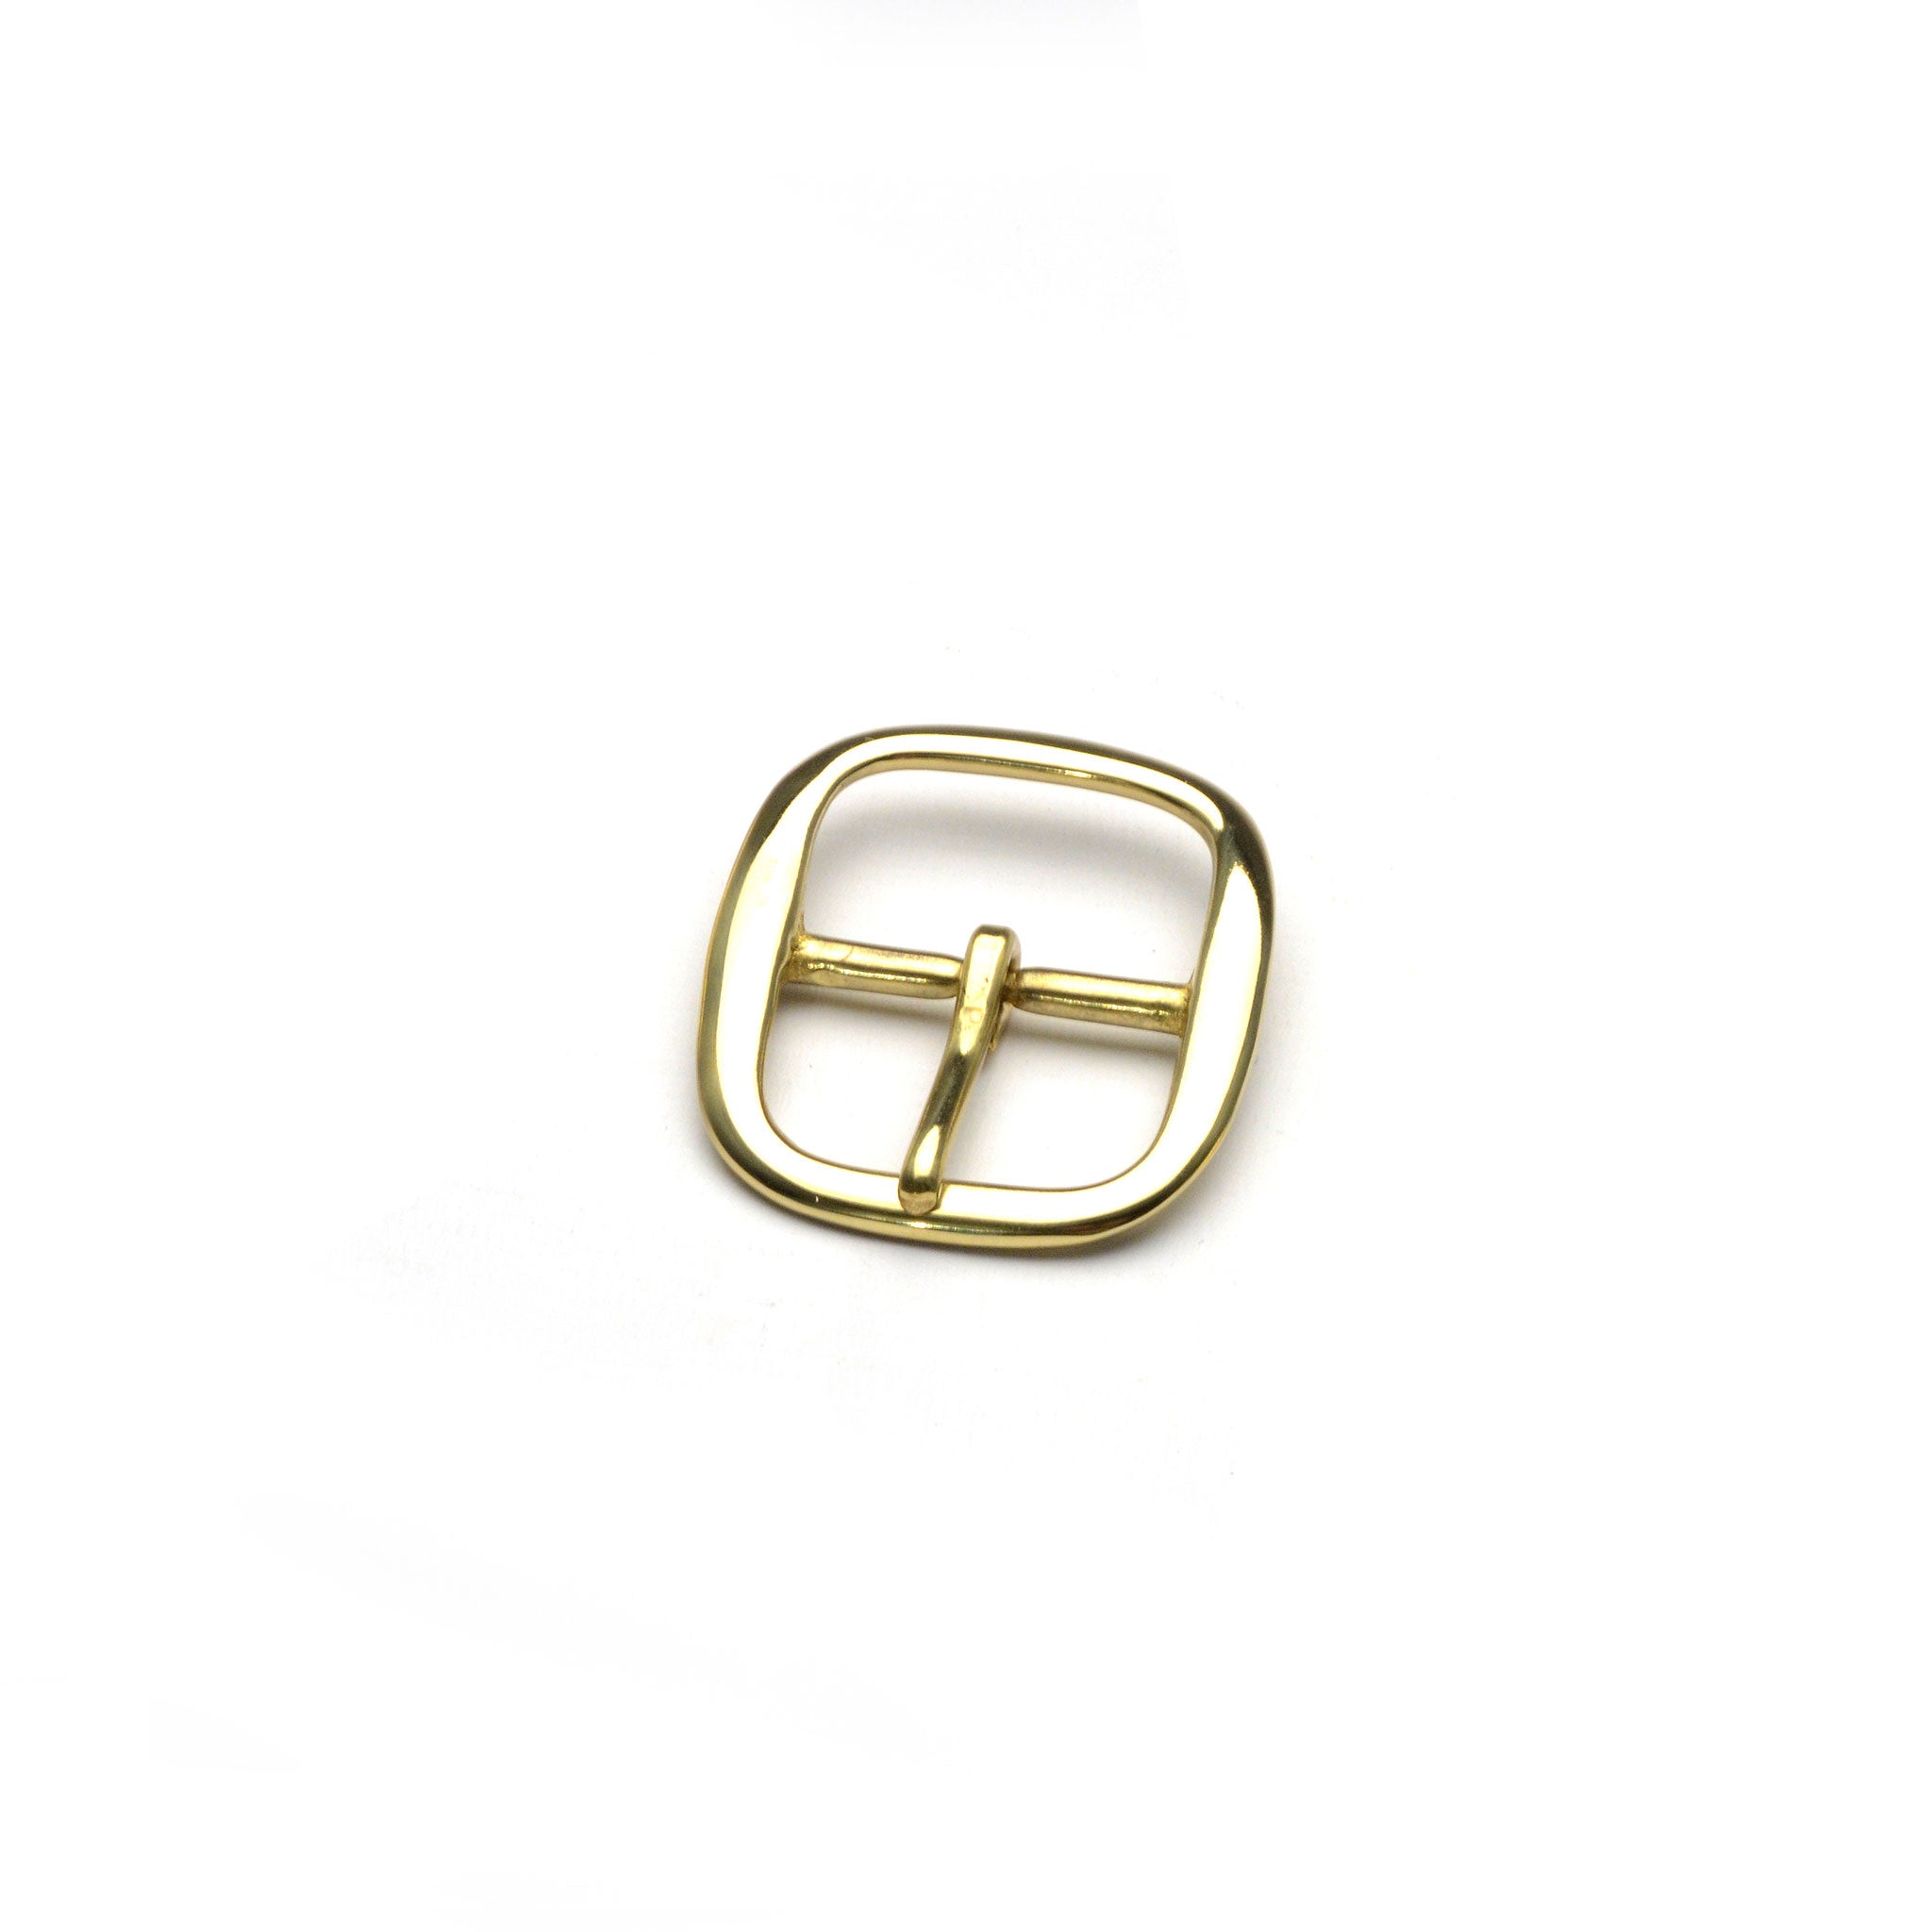 Large Centre Bar Buckle Solid Brass from Identity Leathercraft